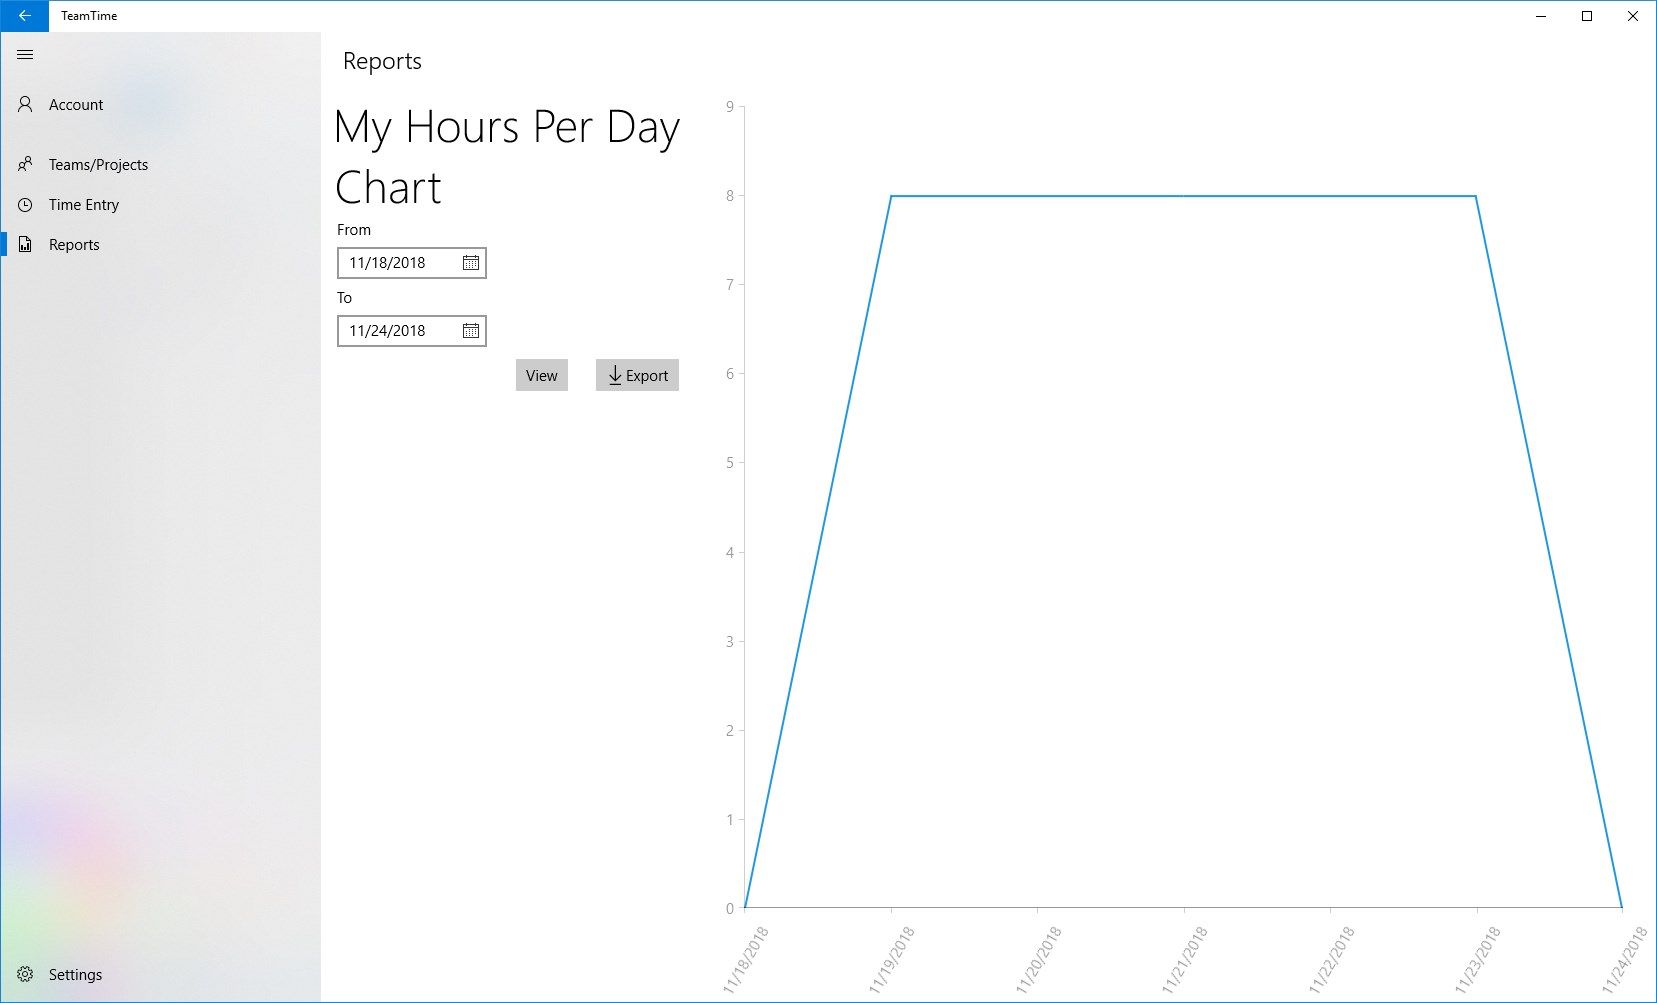 My Hours Per Day Chart